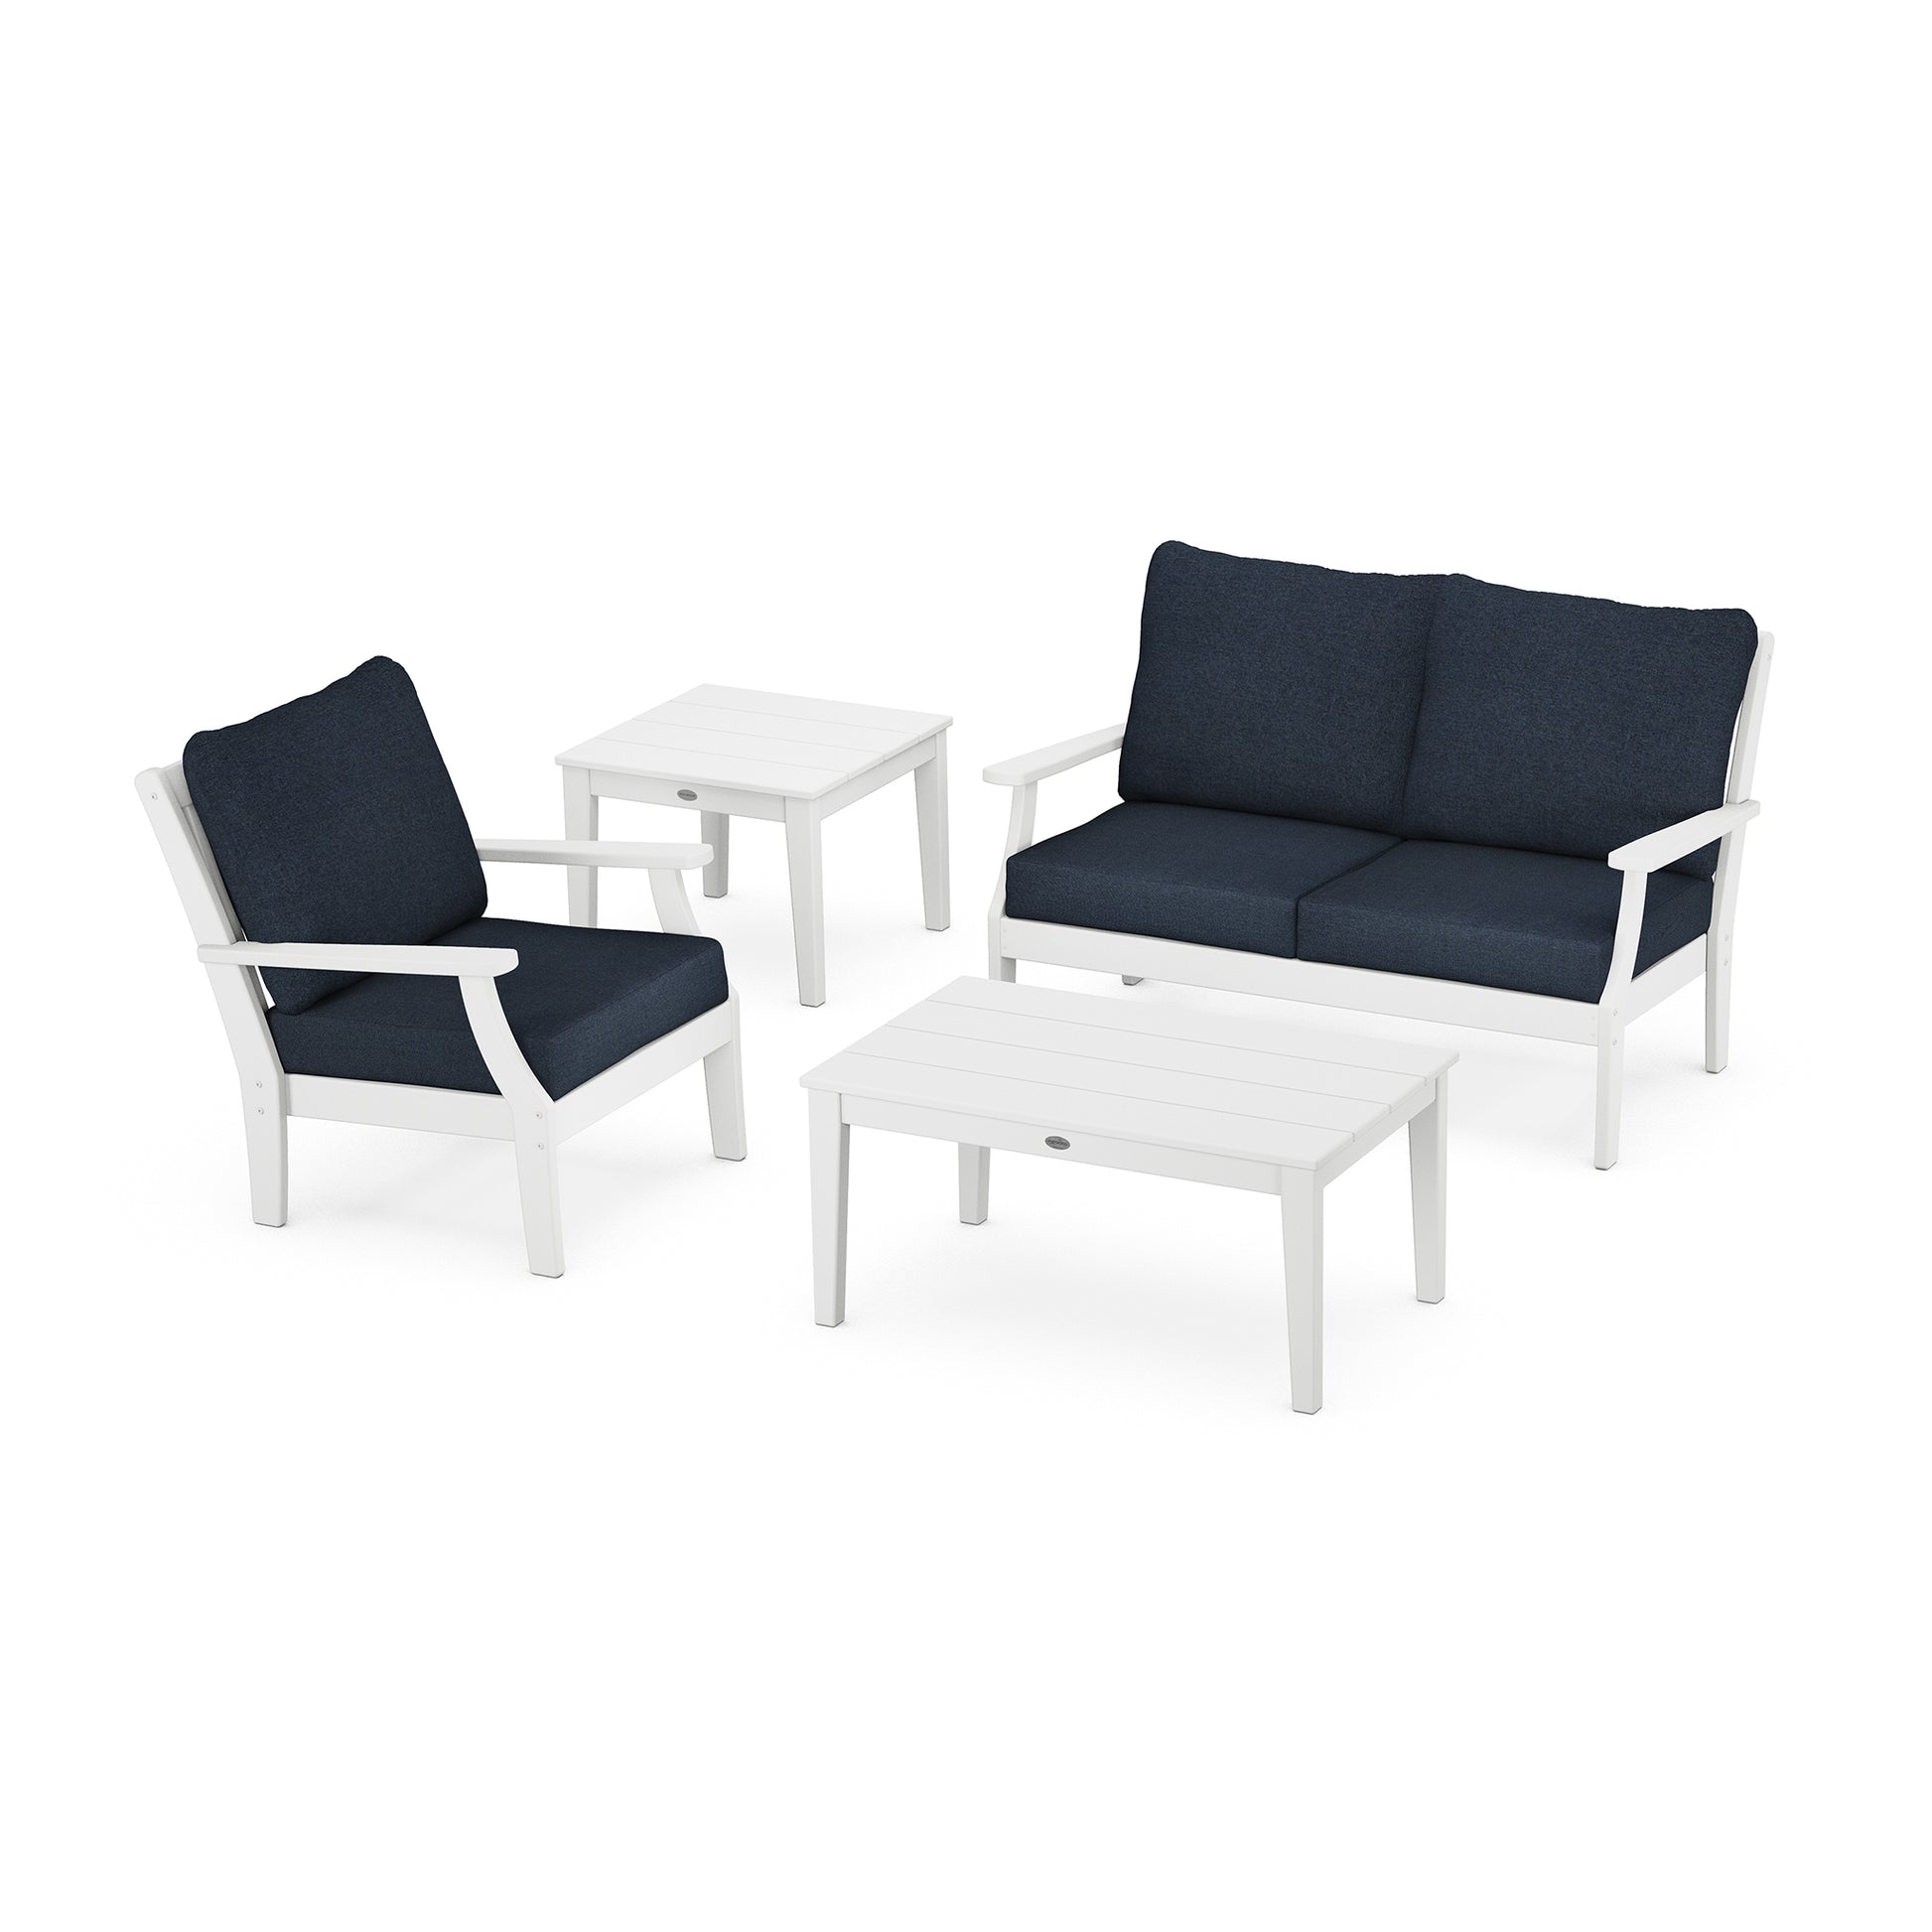 A modern POLYWOOD® Braxton 4-Piece Deep Seating Set including a white sofa, two chairs with navy blue cushions, and two white square tables, arranged on a plain white background.